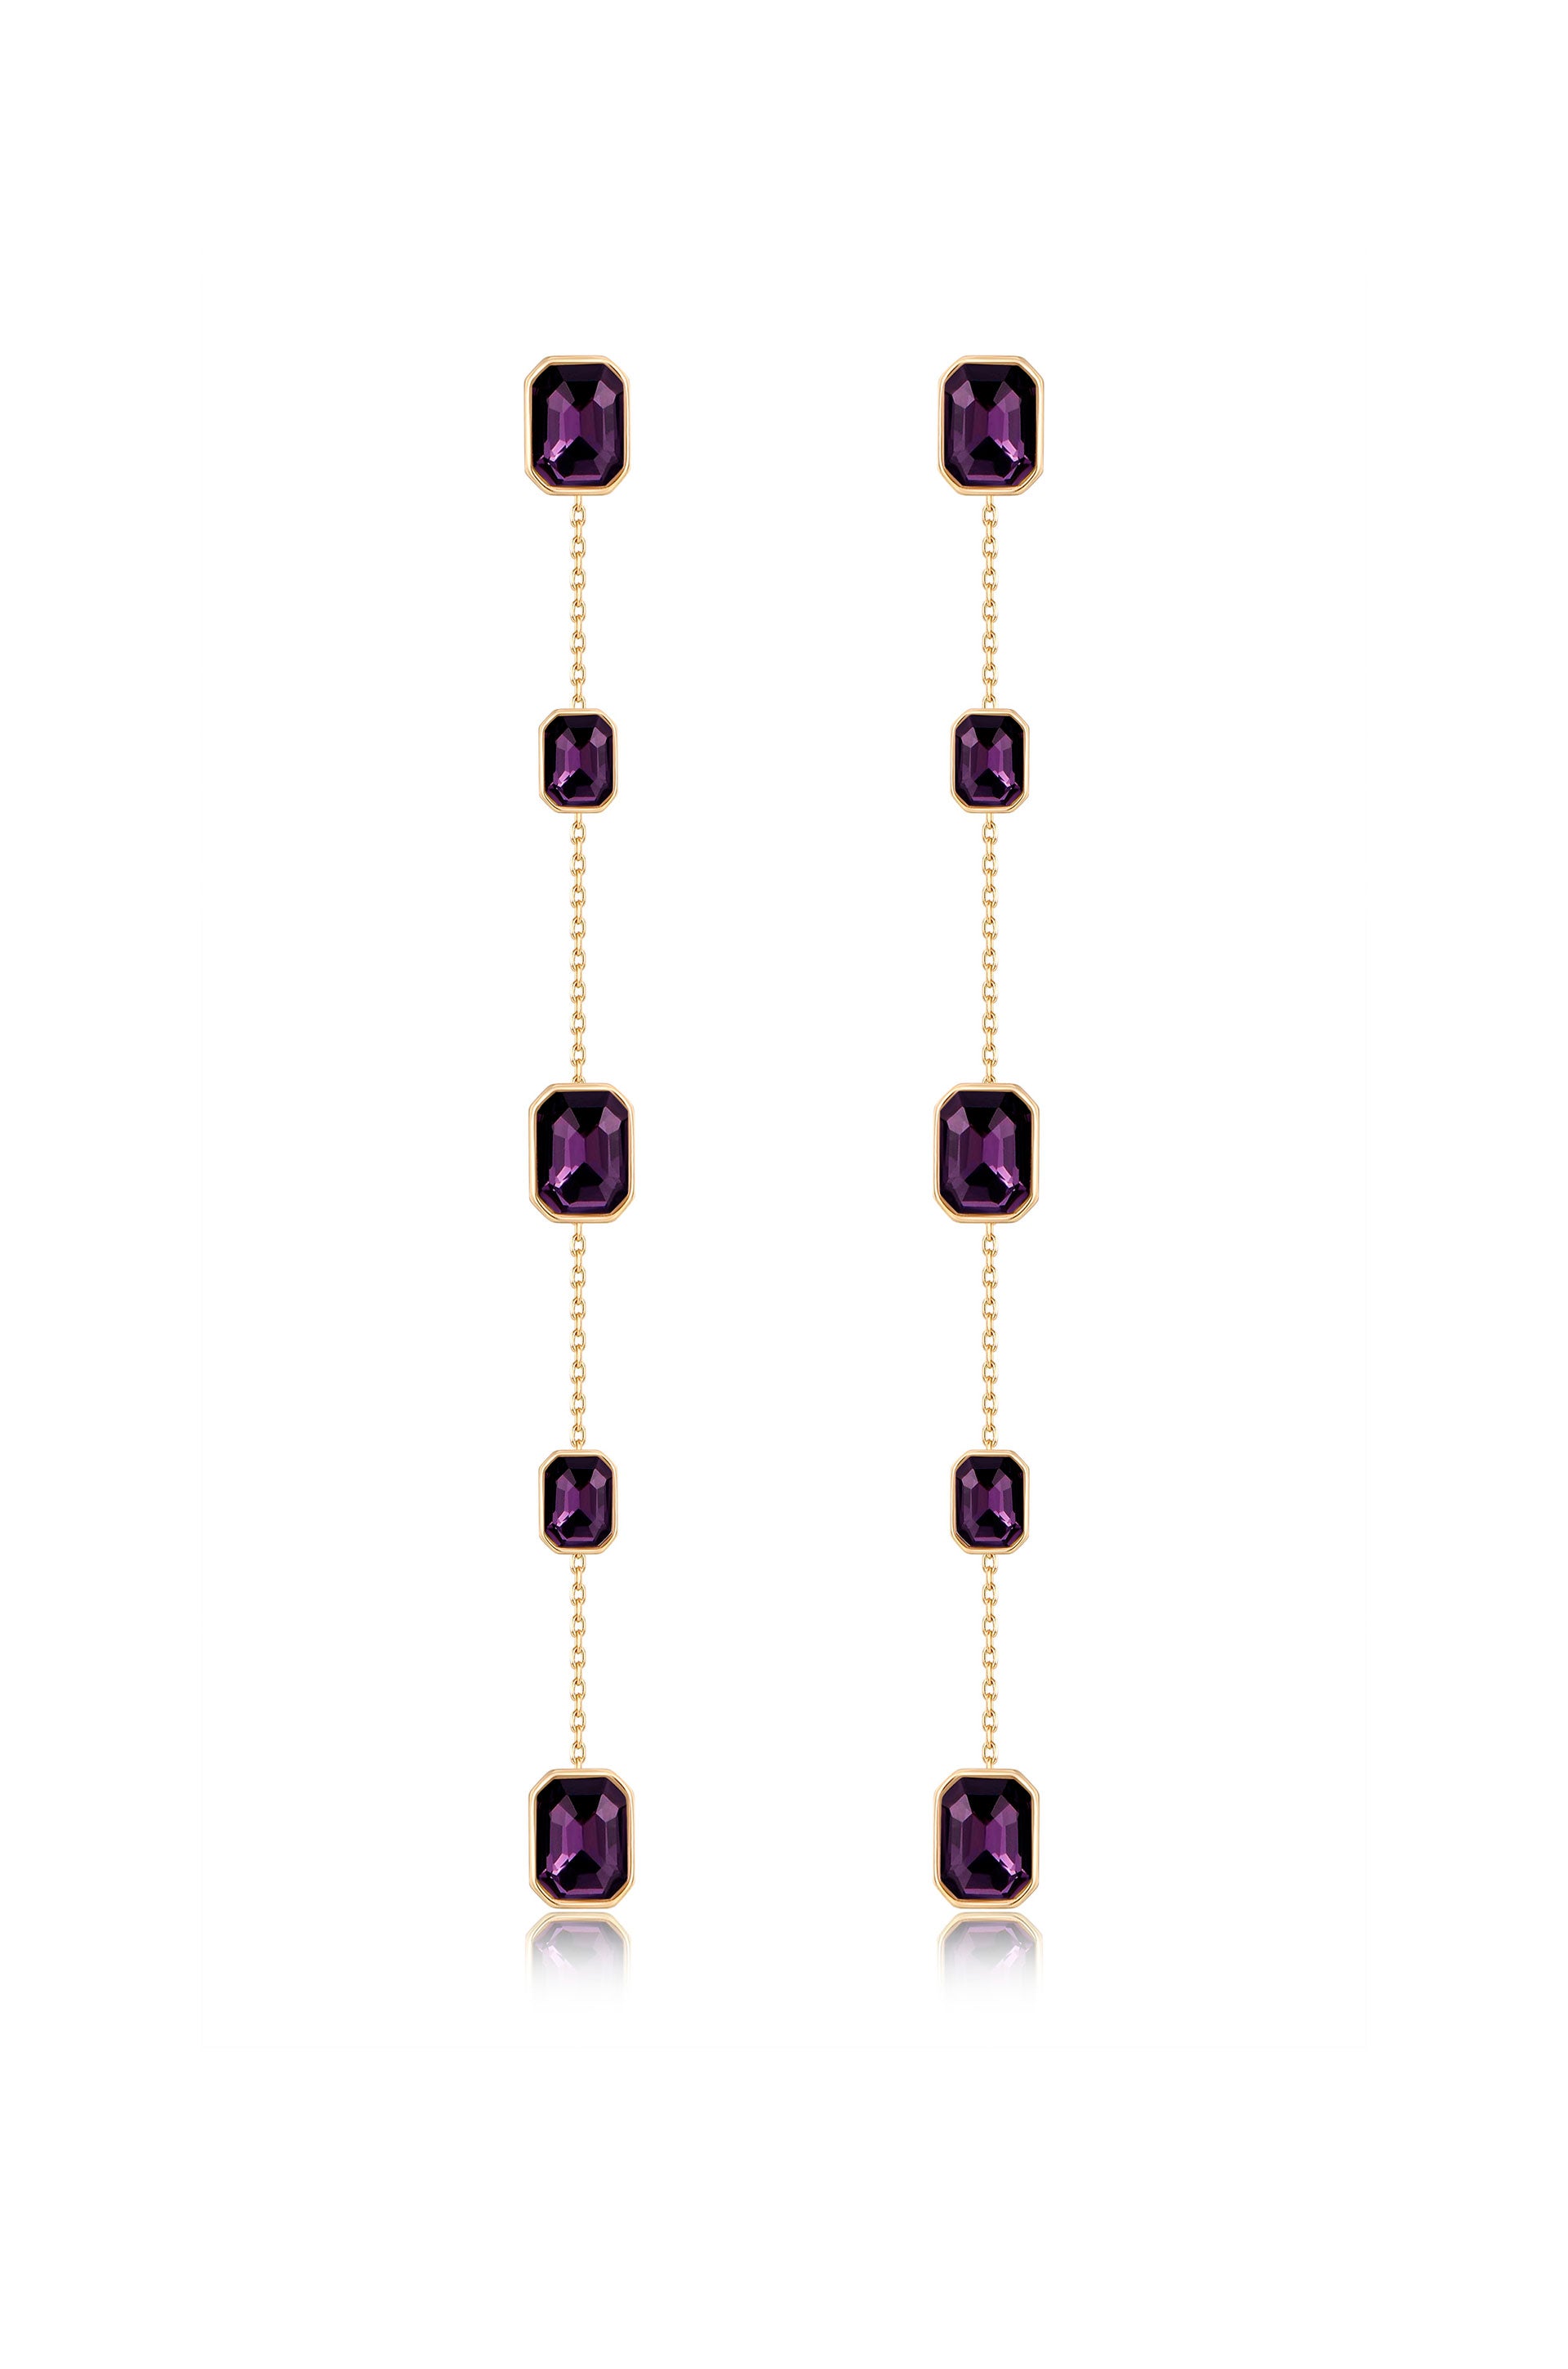 Iconic Crystal Dangle Earrings in amethyst crystals